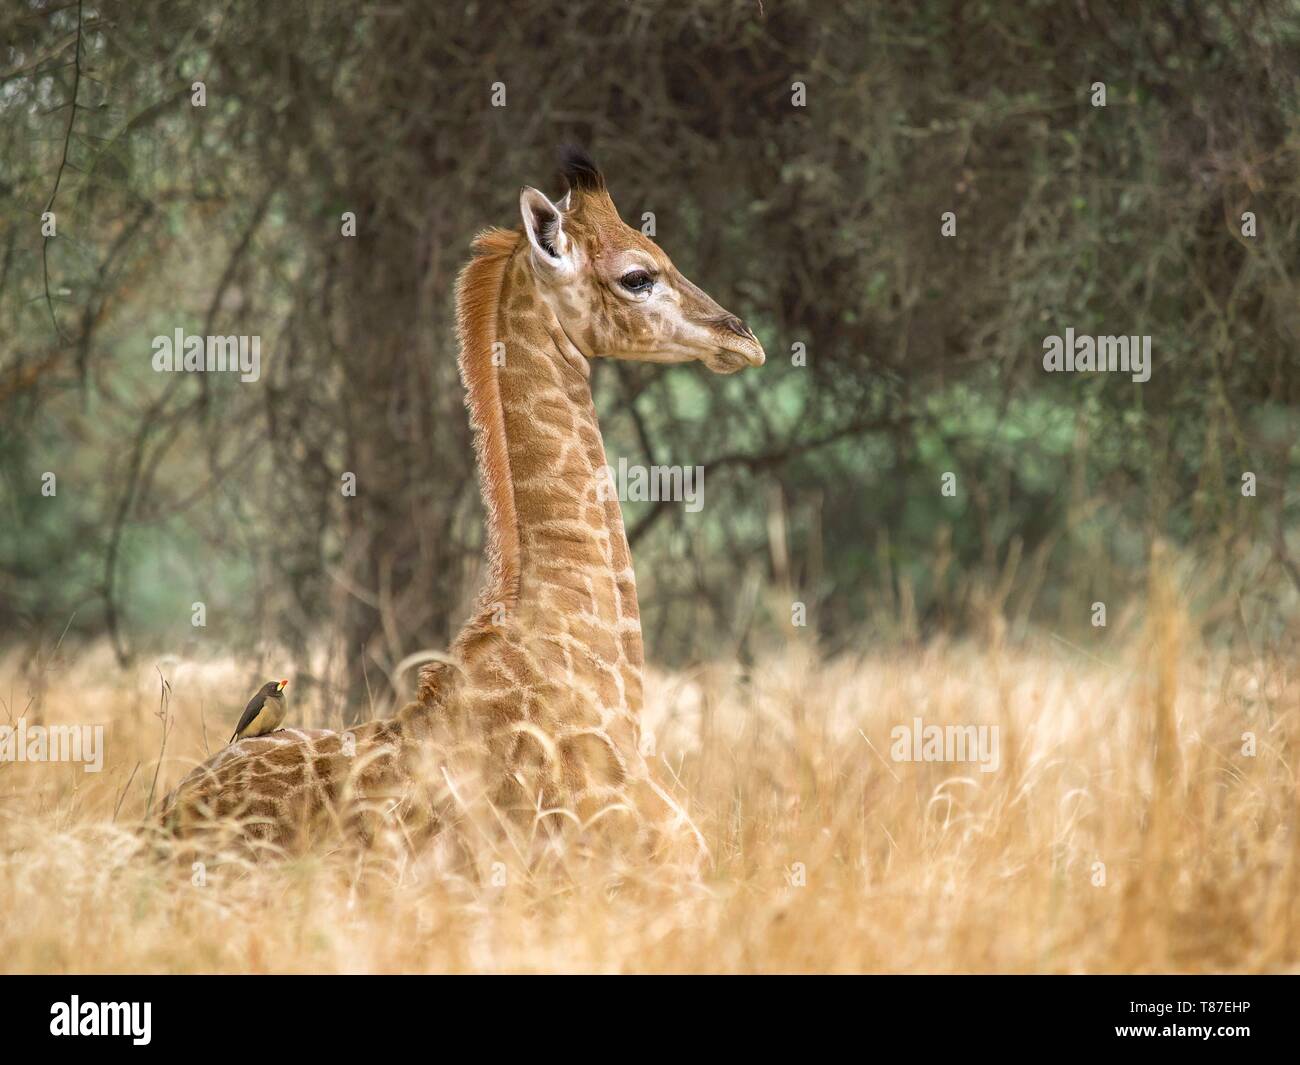 Senegal, Thies Region, Bandia Forest, Bandia Reserve, young 3 weeks old Niger Girafe (endangered specy) Stock Photo